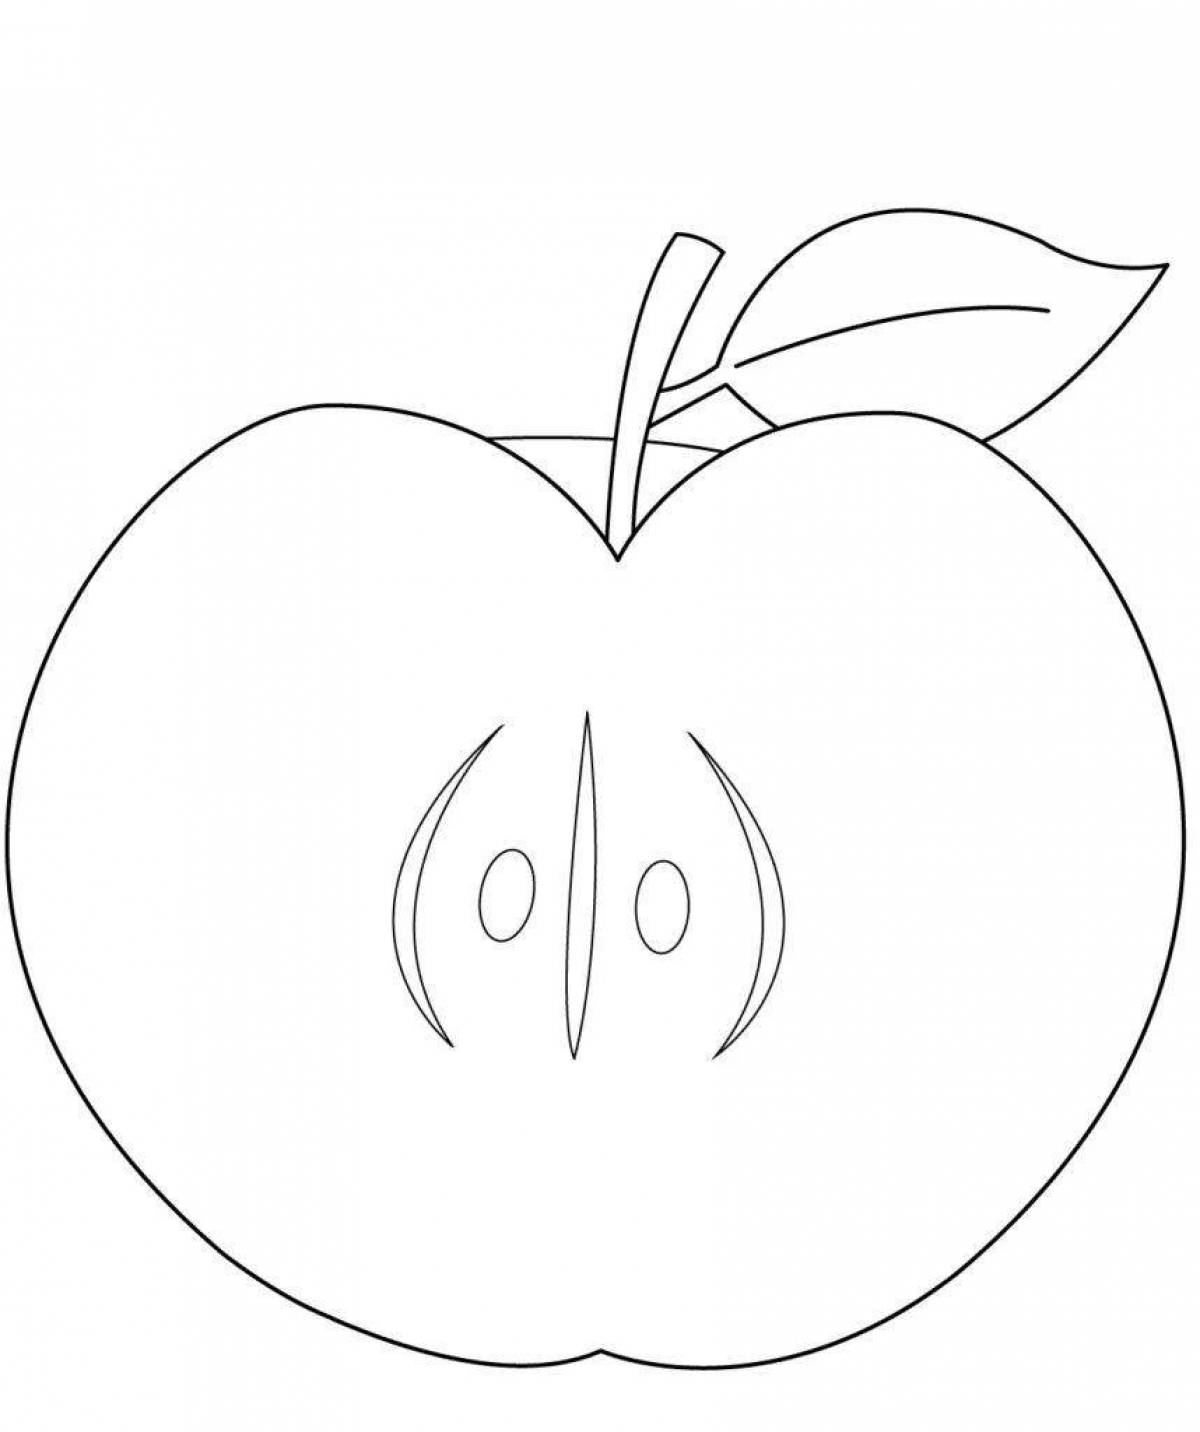 Coloring book sparkling apple